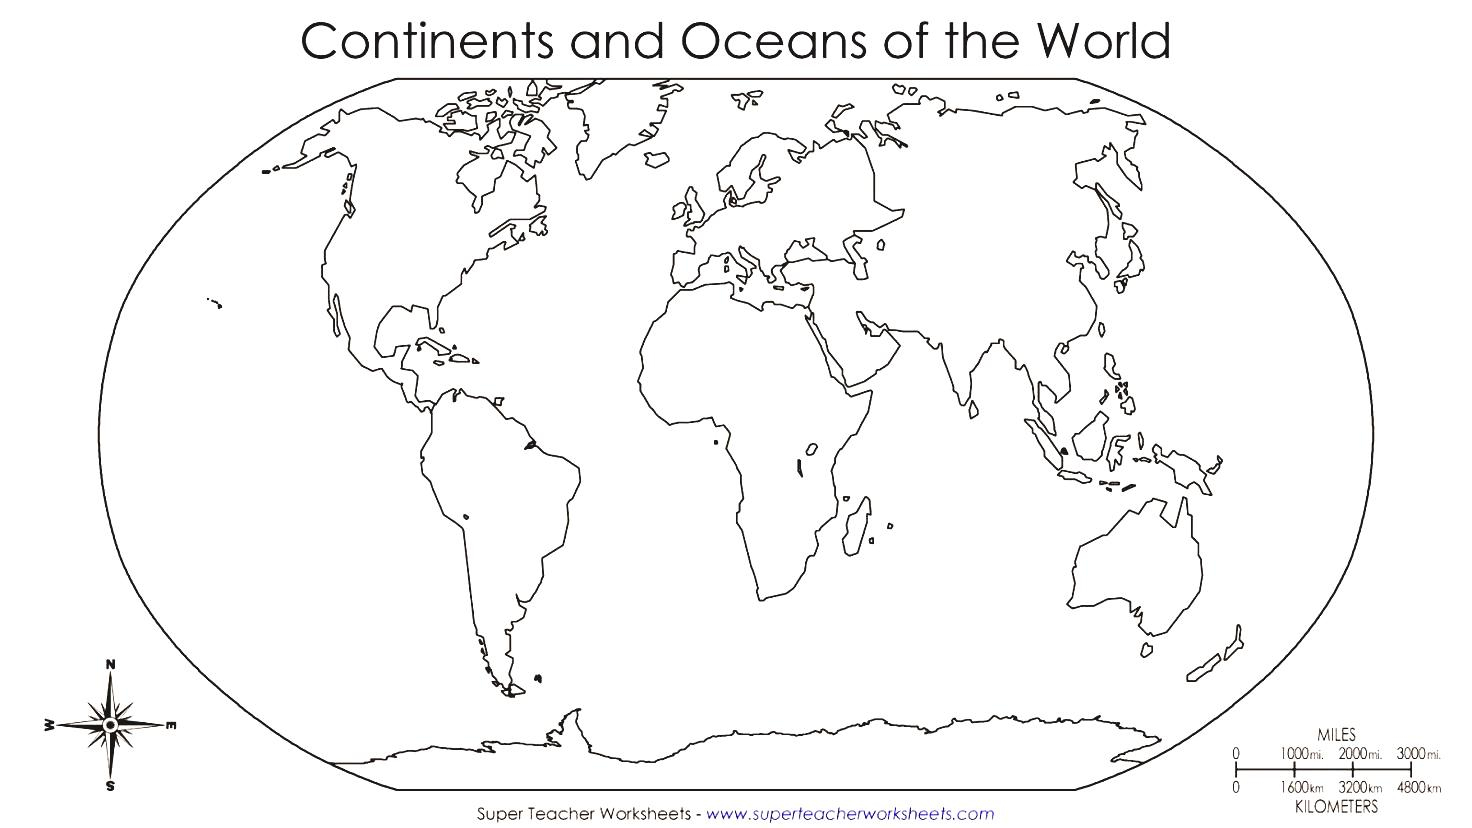 Free Printable Blank World Map Download | Download Them And Try To Solve - Free Printable Blank World Map Download